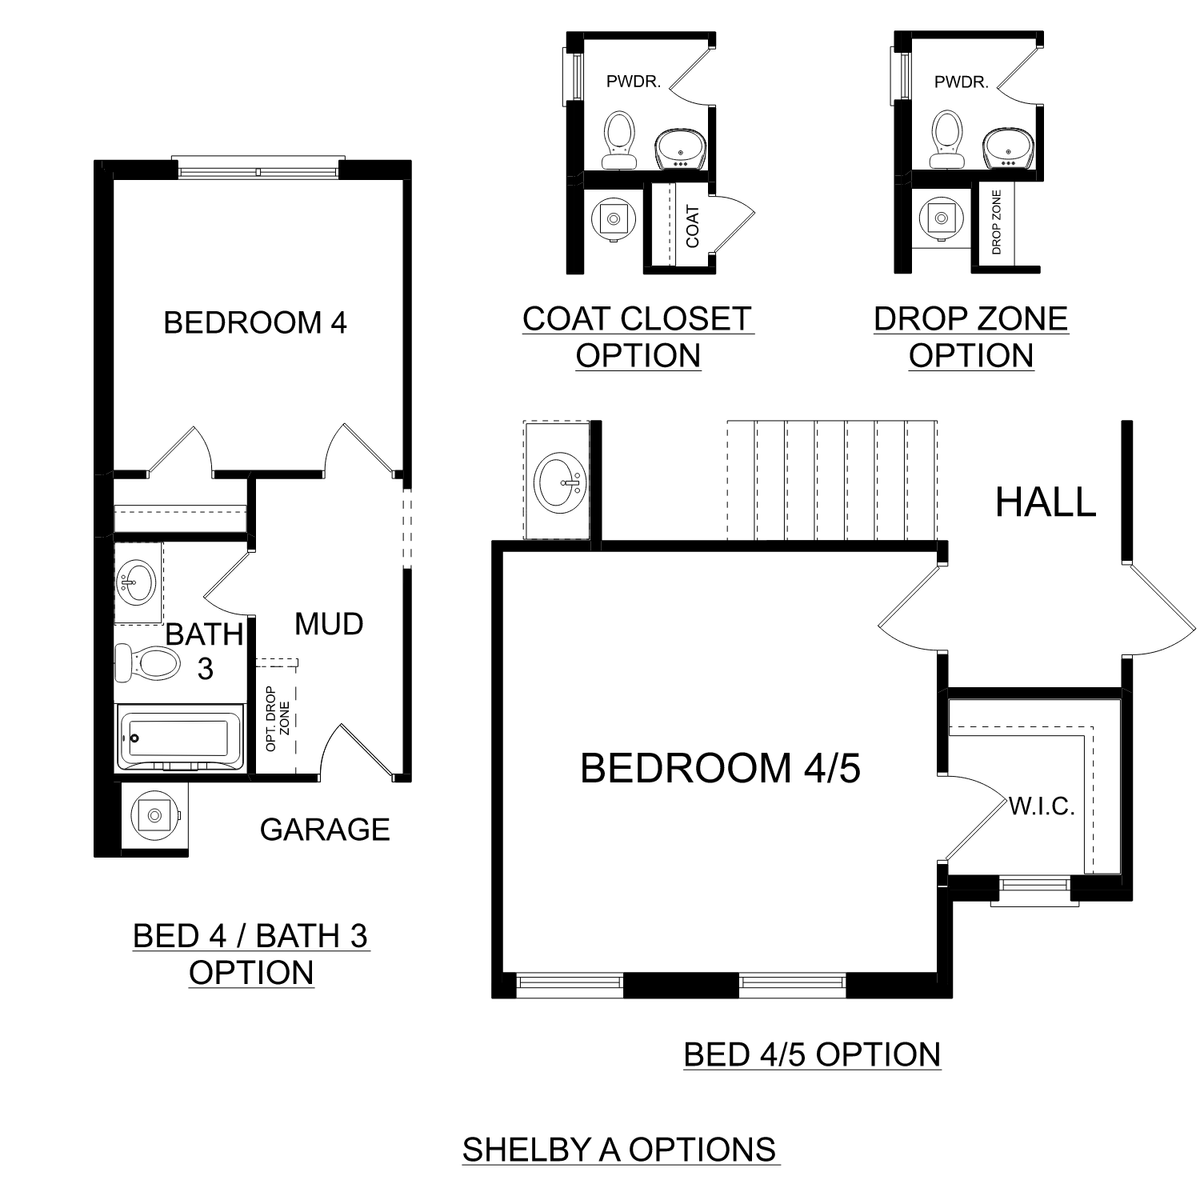 3 - The Shelby floor plan layout for 115 Wilcot Road in Davidson Homes' Walker's Hill community.